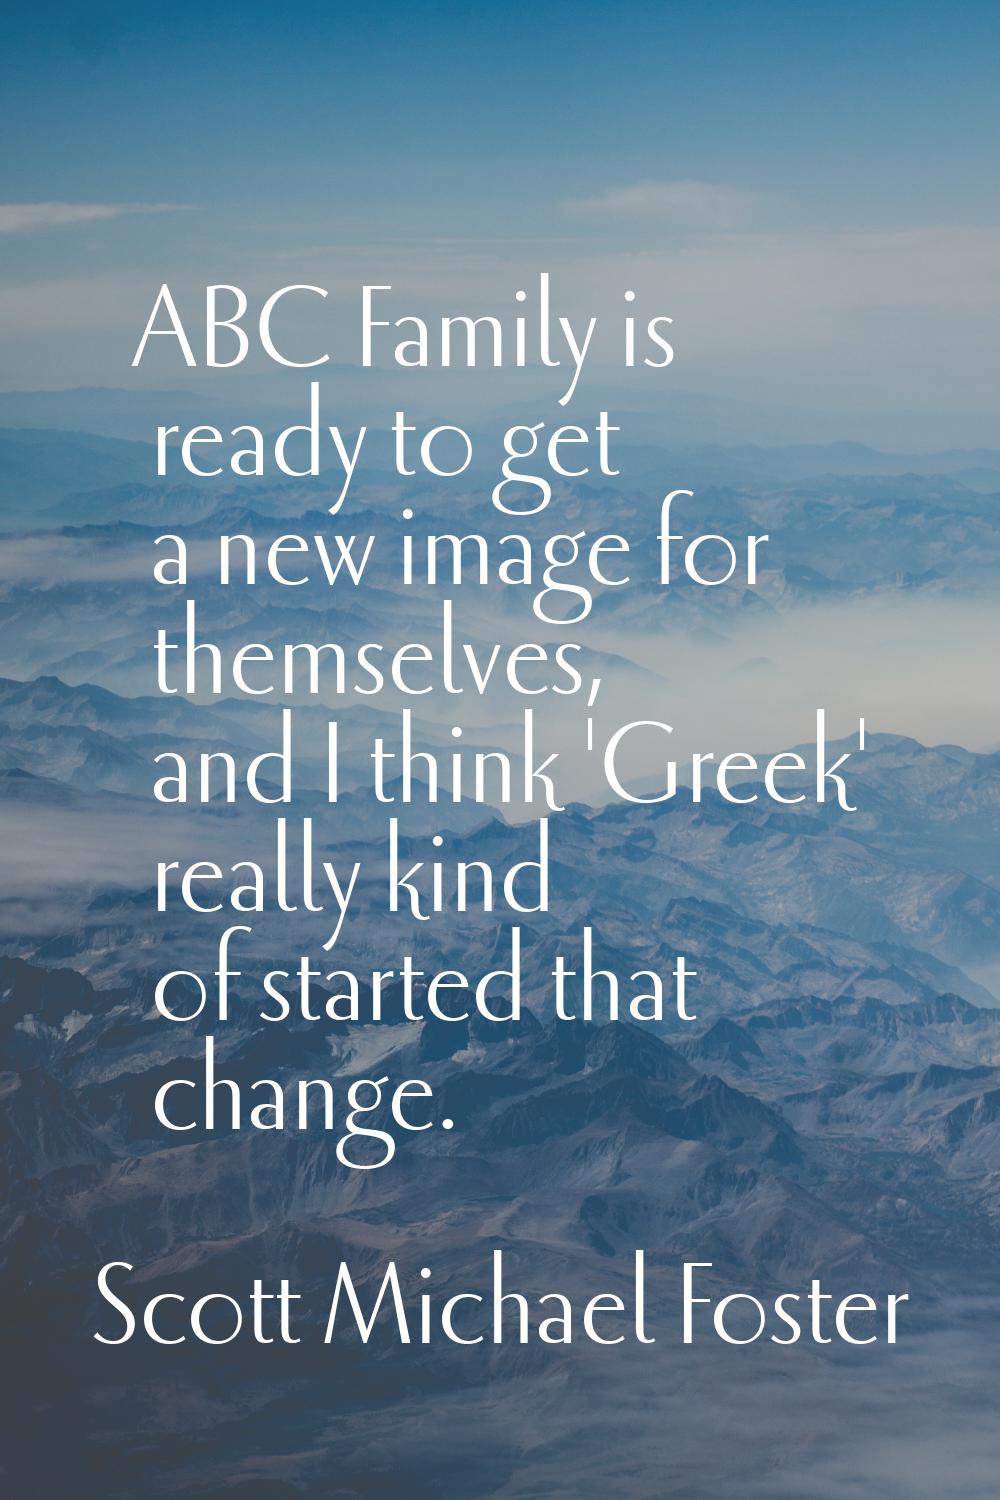 ABC Family is ready to get a new image for themselves, and I think 'Greek' really kind of started t